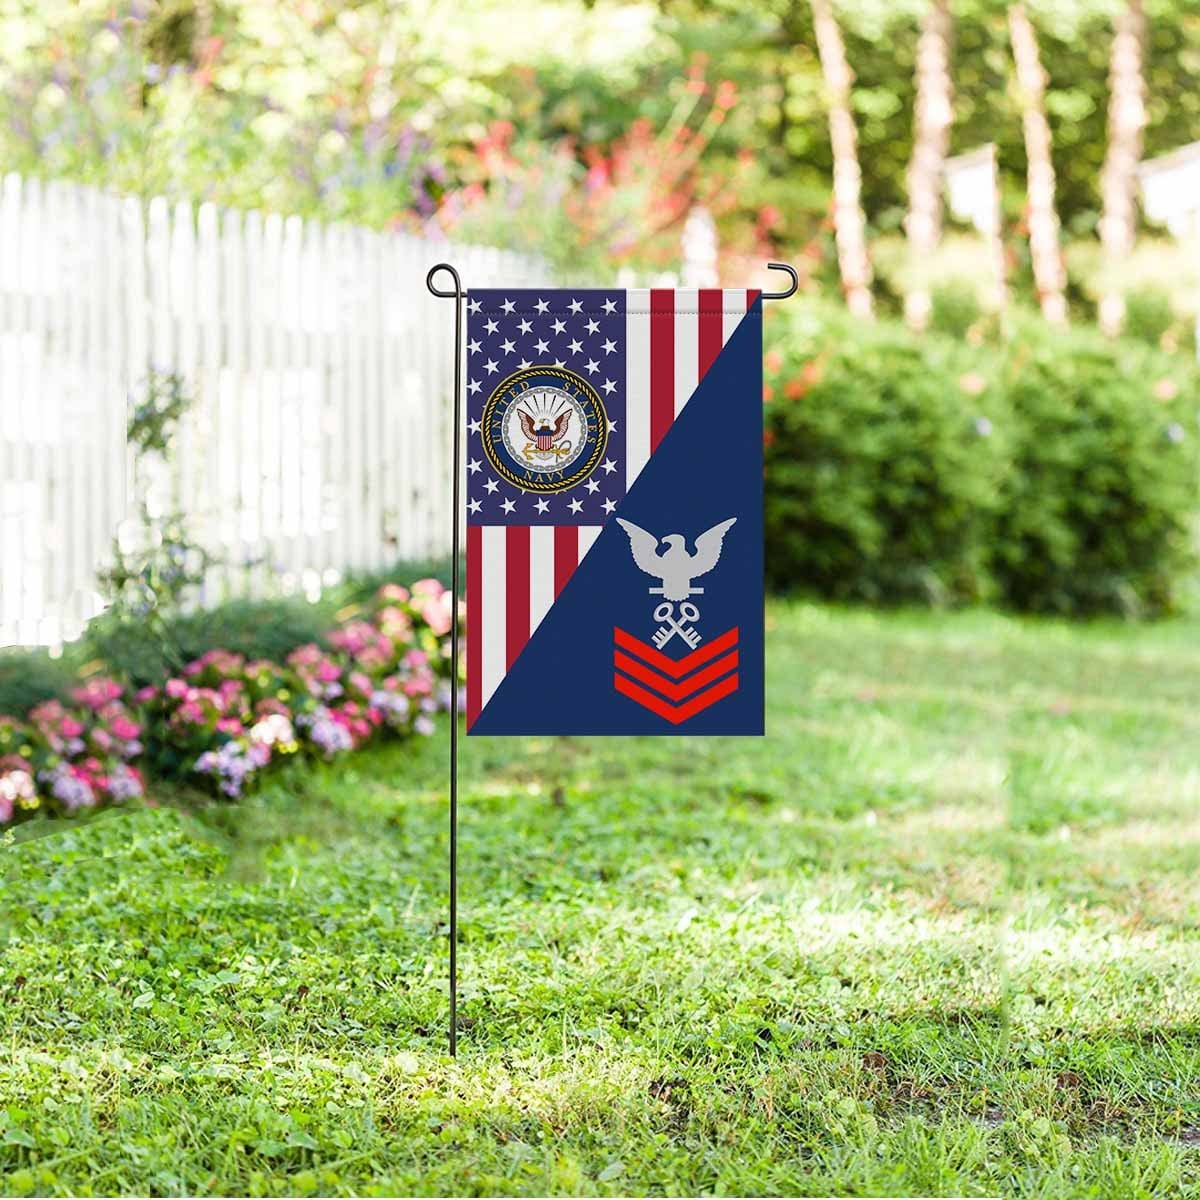 Navy Storekeeper Navy SK E-6 Red Stripe Garden Flag/Yard Flag 12 inches x 18 inches Twin-Side Printing-GDFlag-Navy-Rating-Veterans Nation